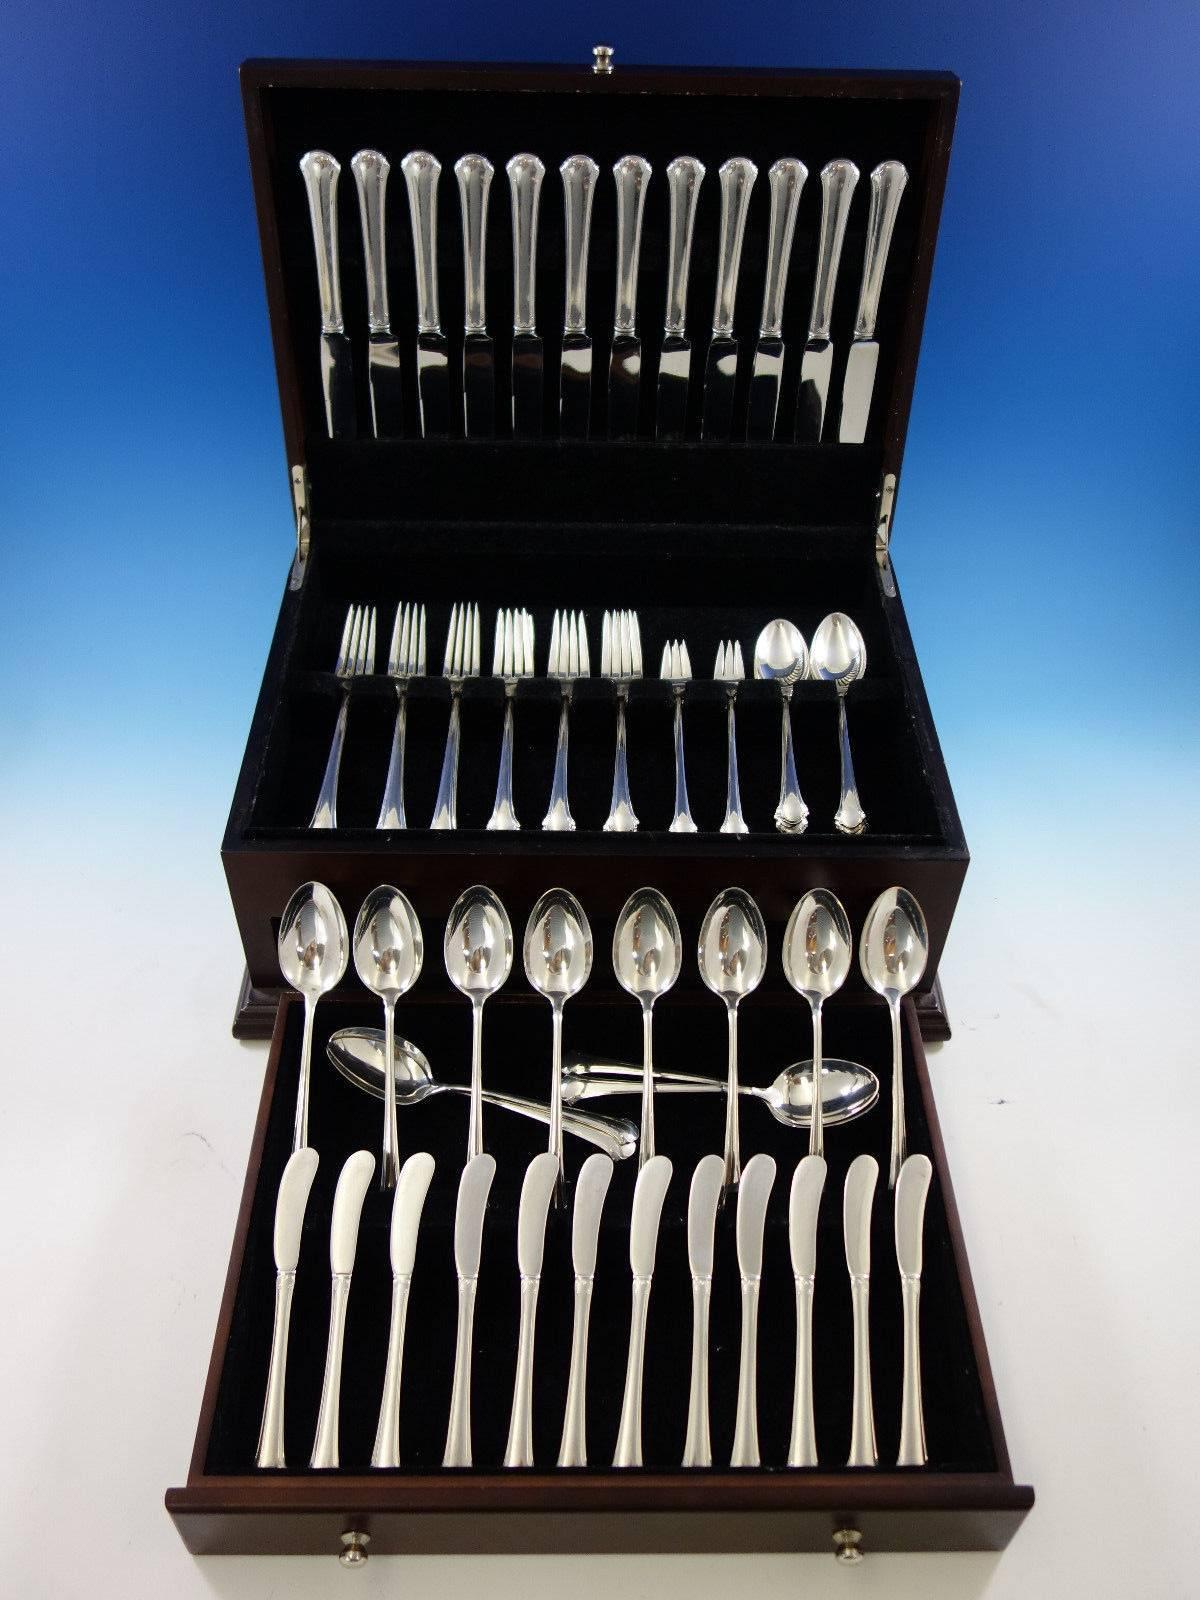 Chippendale by Towle sterling silver flatware set of 84 pieces. This set includes: 

12 Knives, 8 3/4